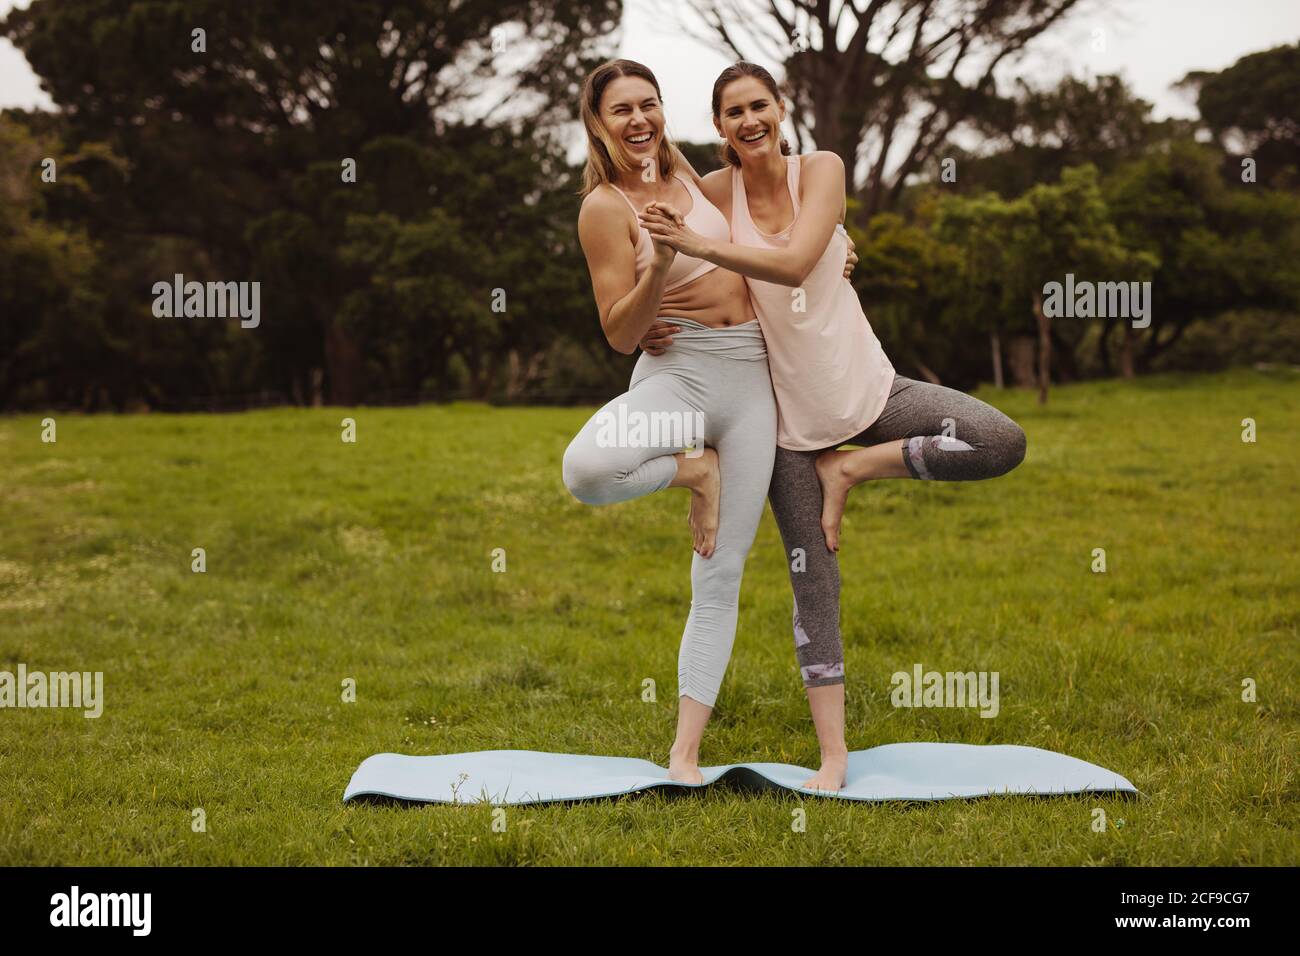 Cheerful women friends enjoying during their workout in a park. Two fitness women trying to balance while standing on one leg holding each other. Stock Photo